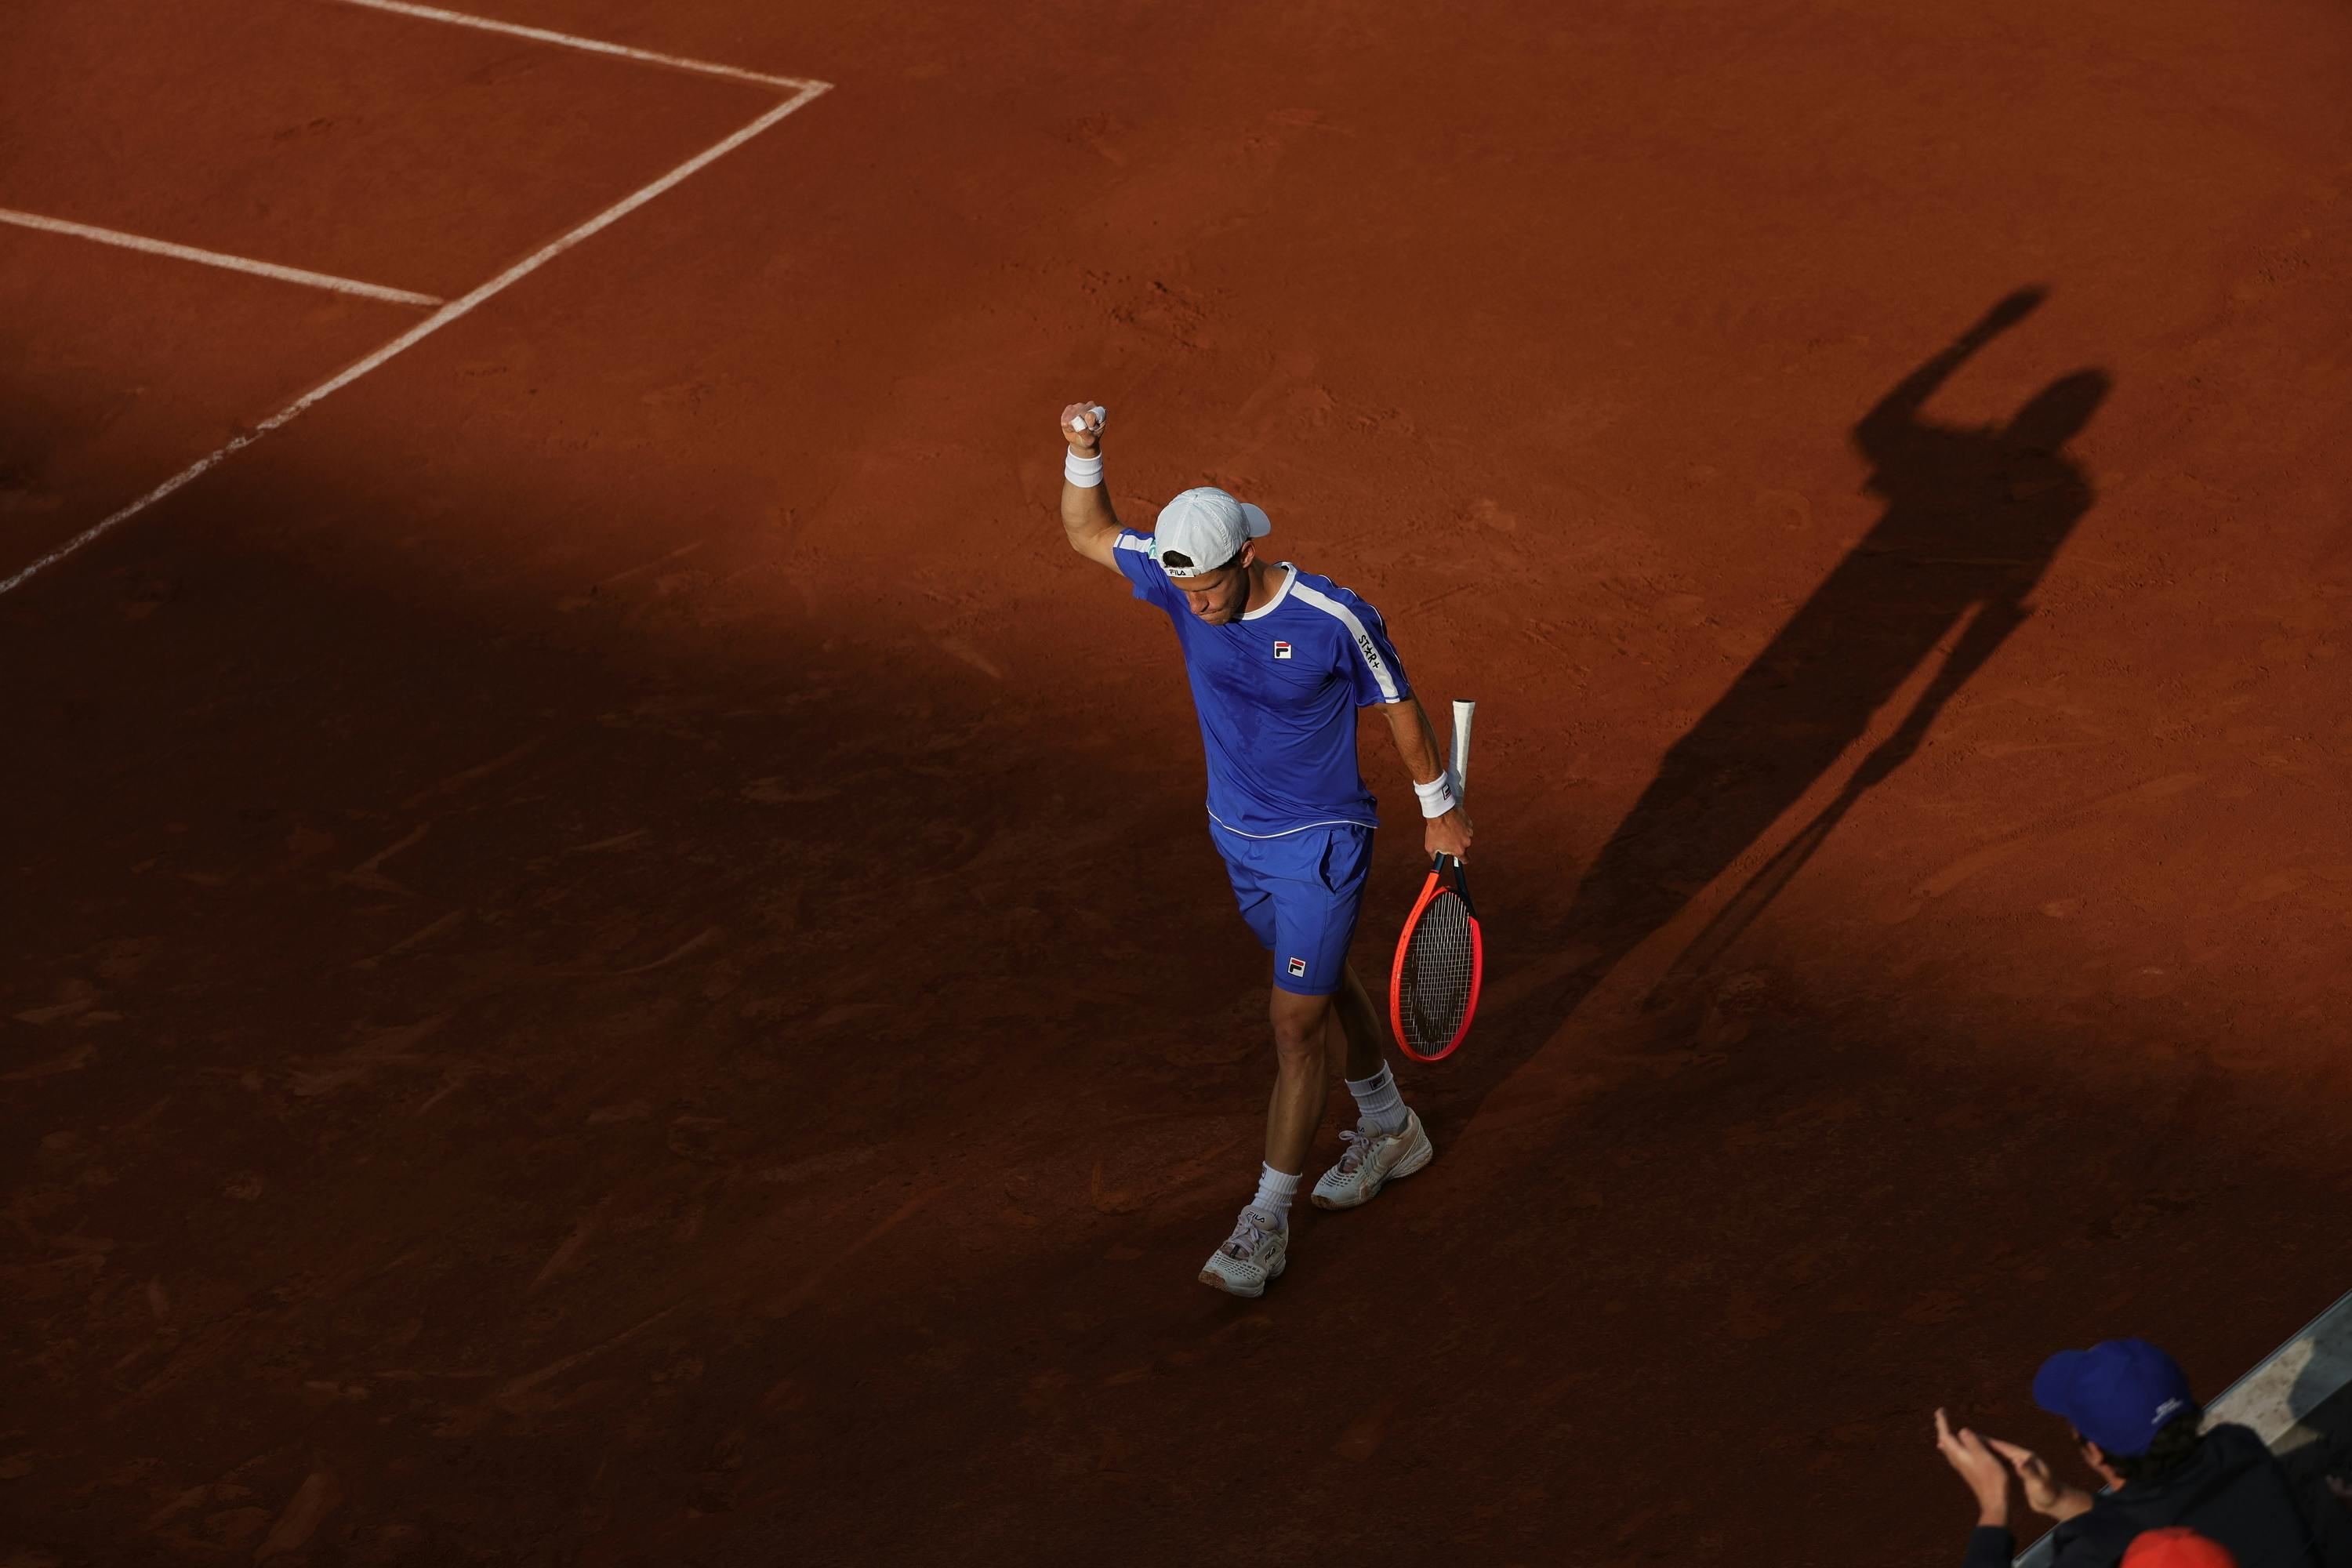 2024 Qualification: schedule for Tuesday May 21 – Roland-Garros